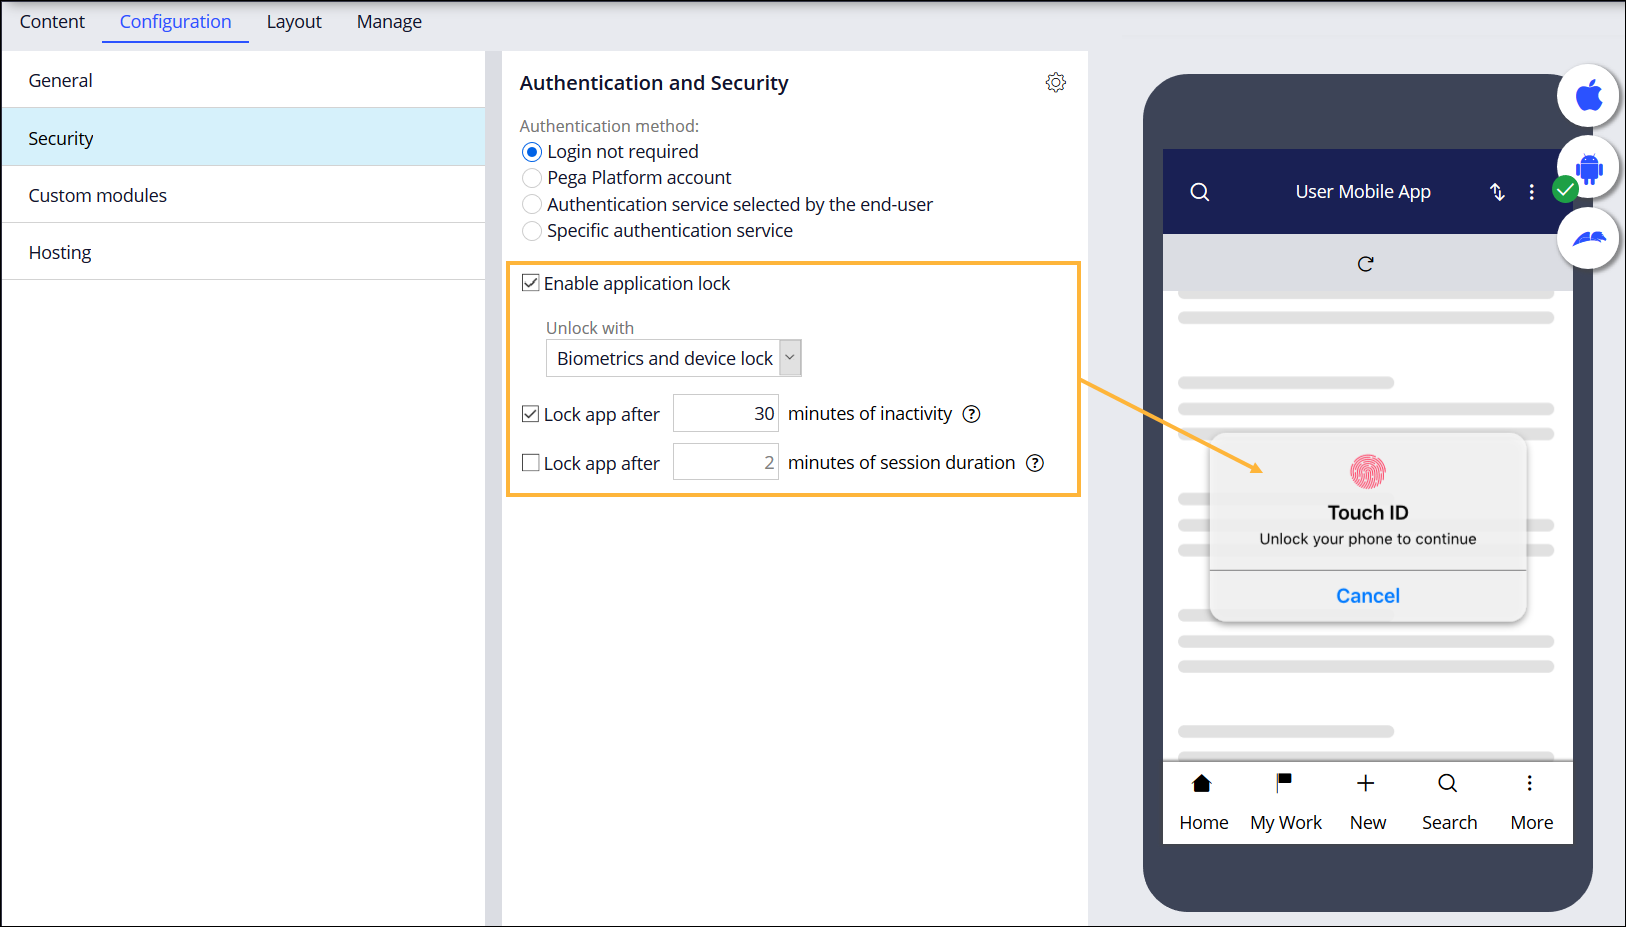 Authentication and locking settings